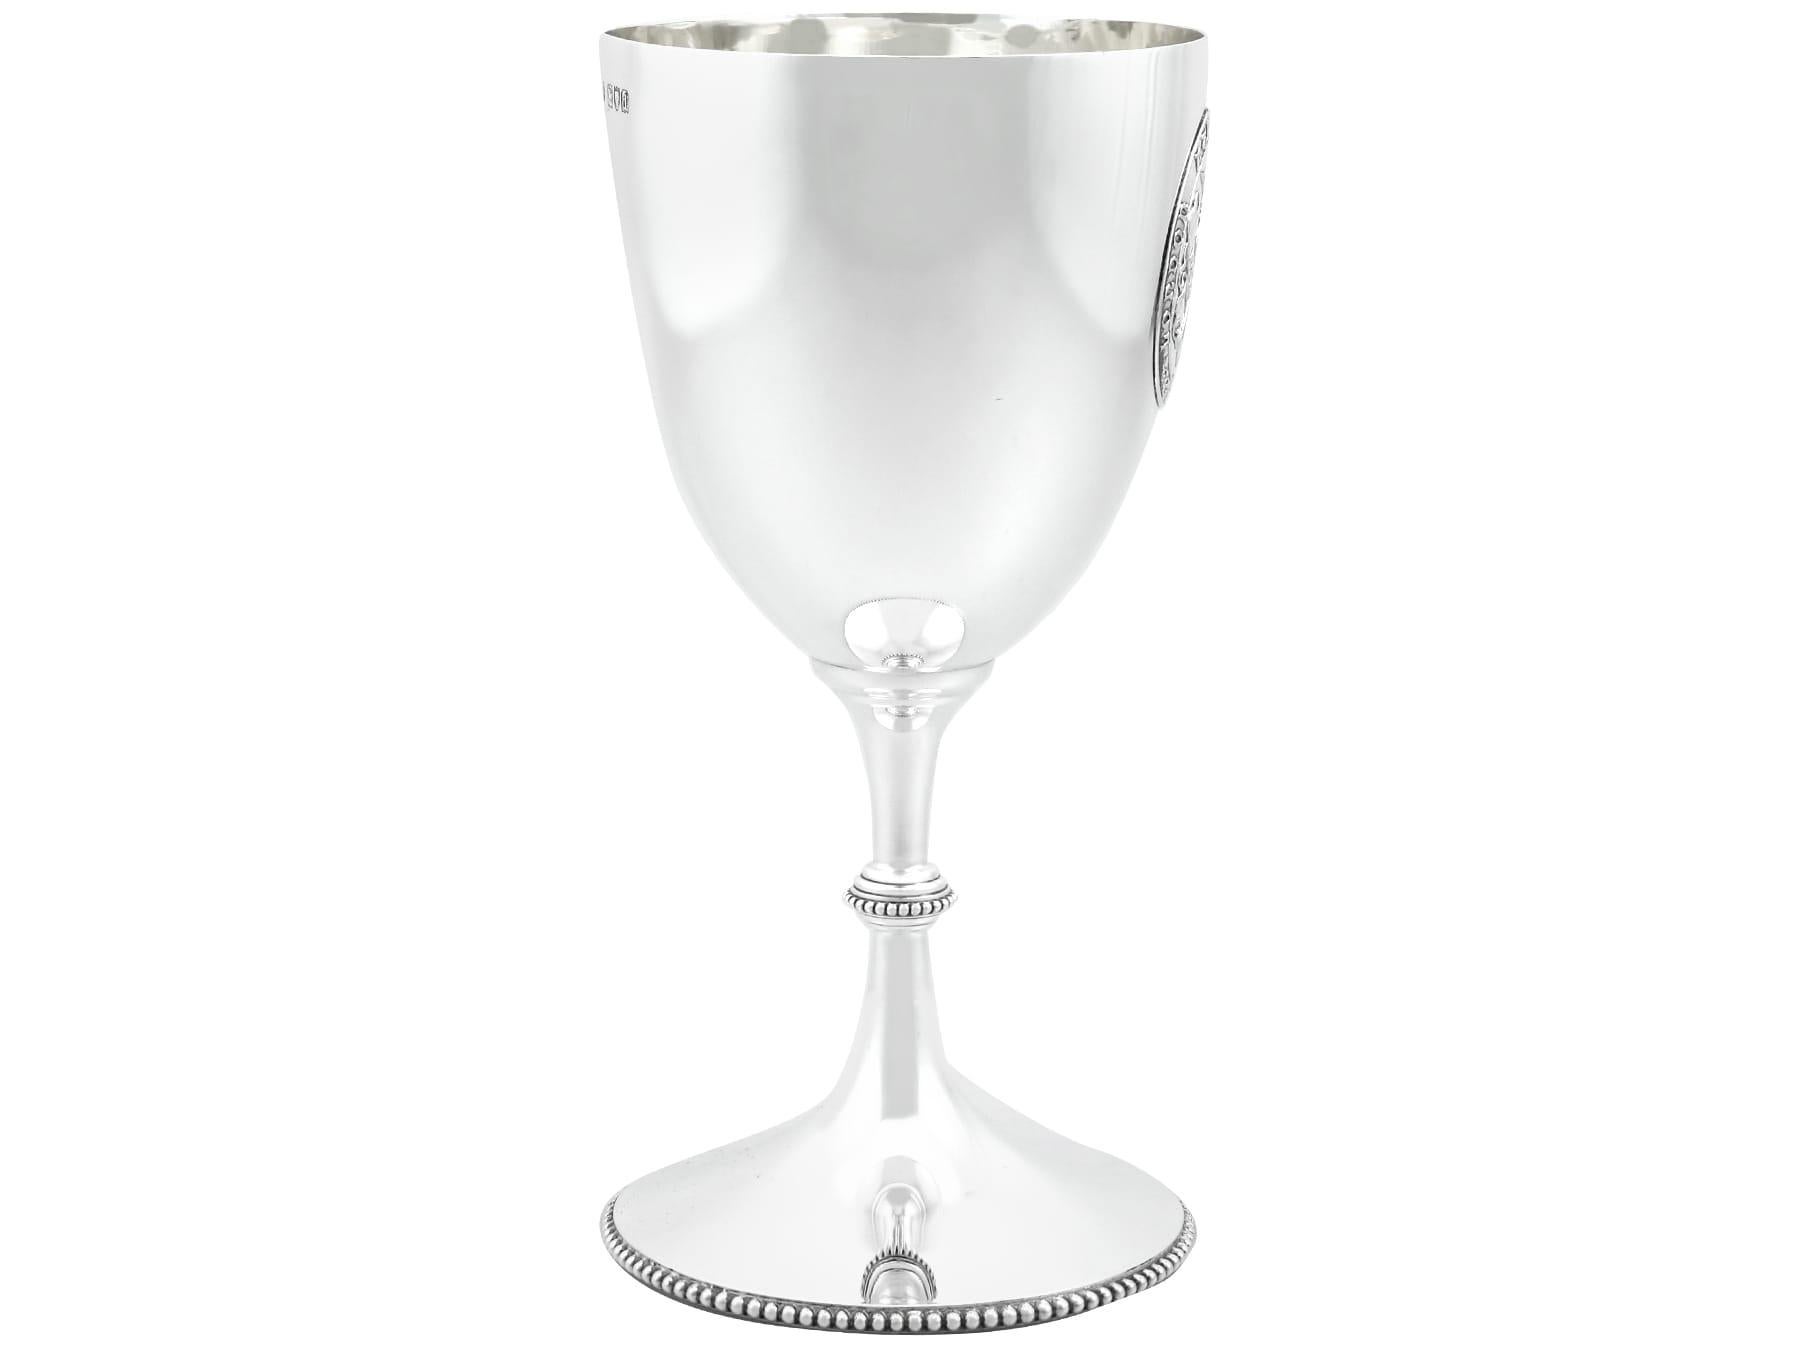 Antique Victorian Sterling Silver Goblet In Excellent Condition For Sale In Jesmond, Newcastle Upon Tyne